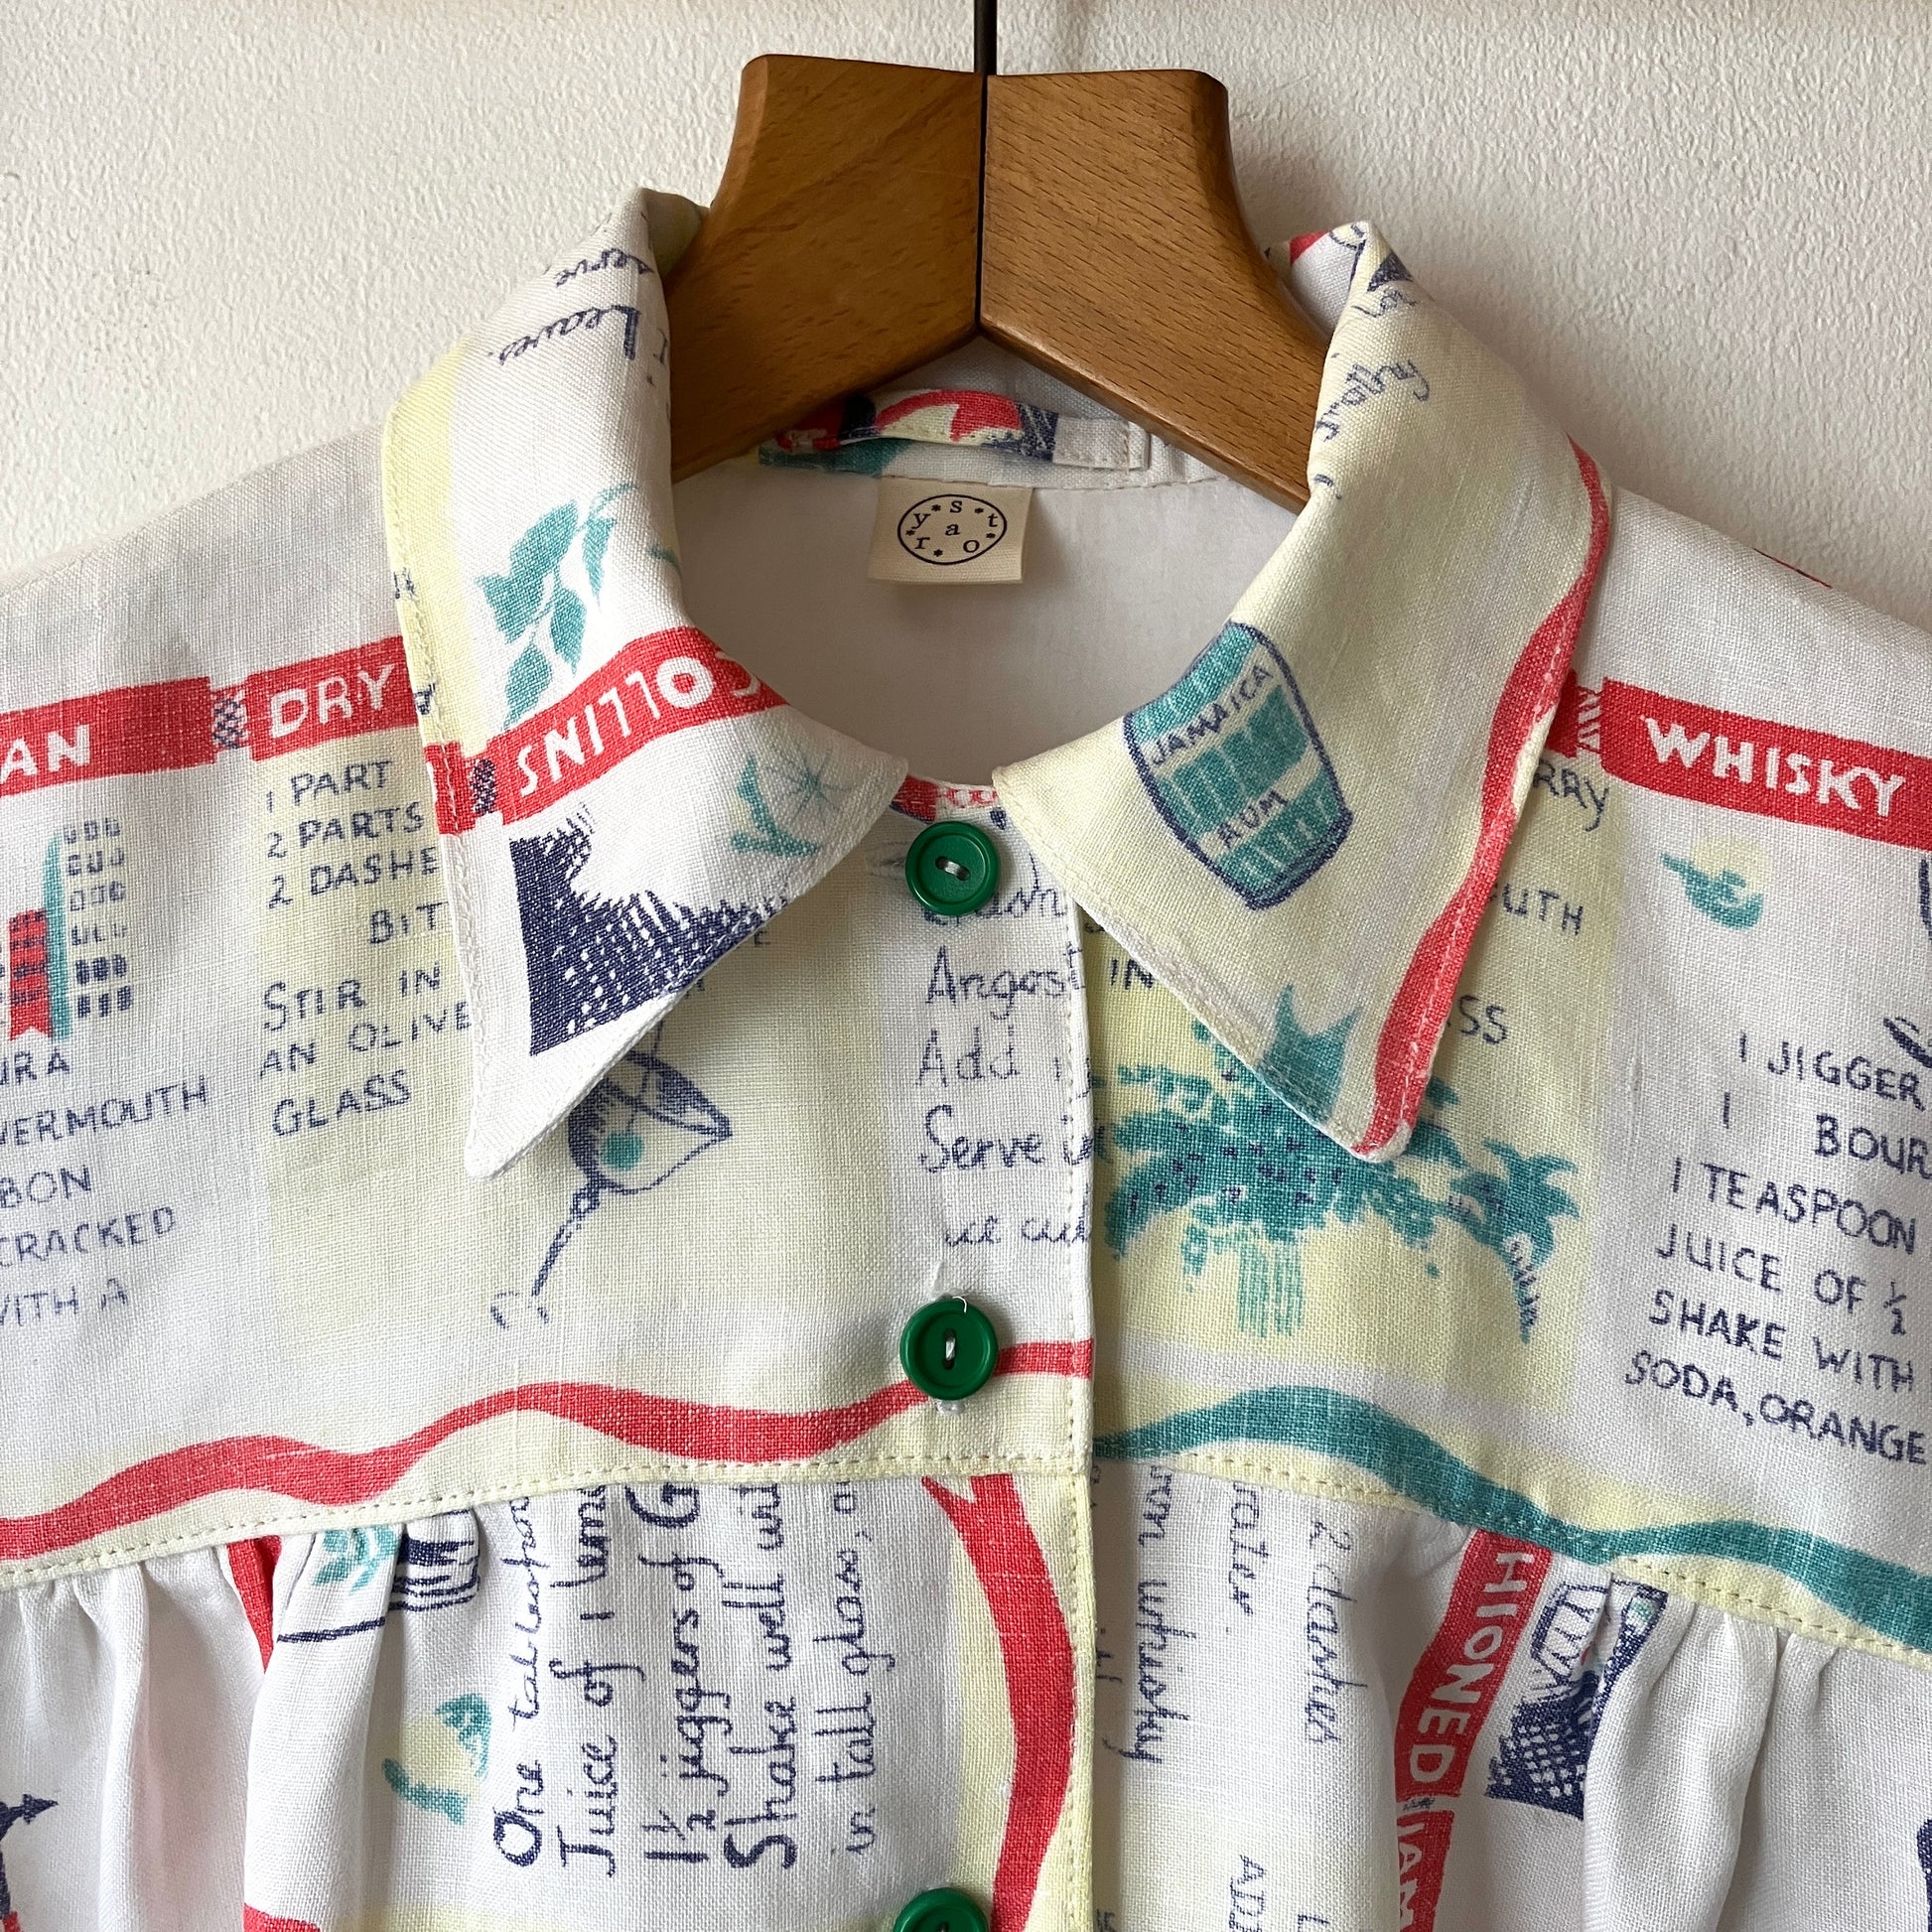 A shirt handmade from a vintage 'cocktails' tablecloth, featuring recipes and illustrations (close-up of collar)